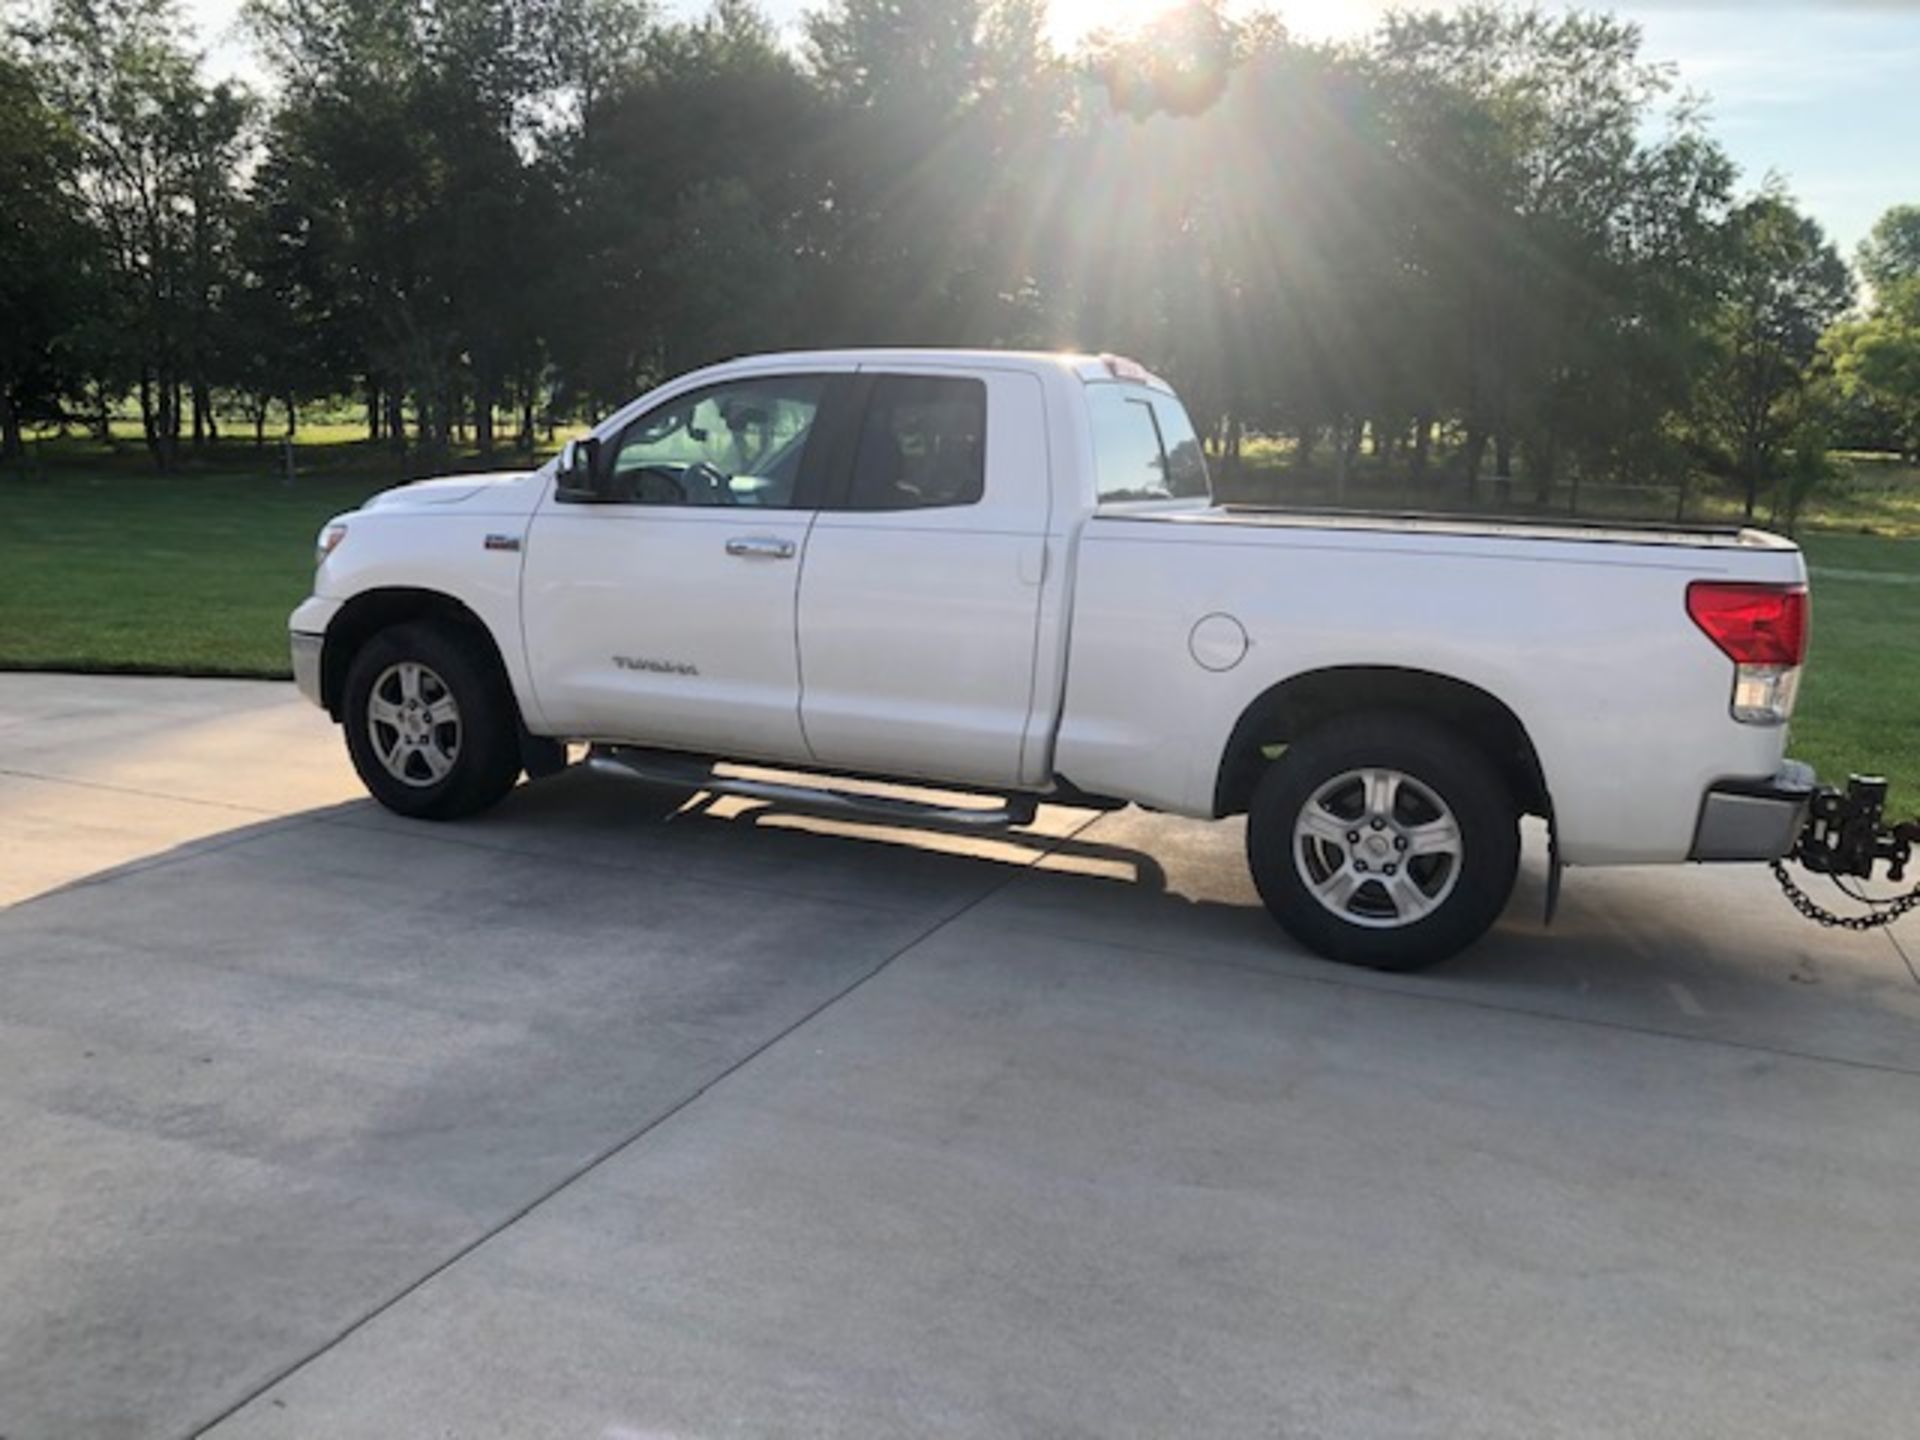 2013 TOYOTA TUNDRA 4 x 4 PICKUP TRUCK W/APPROX. 112K MILES - Image 3 of 13